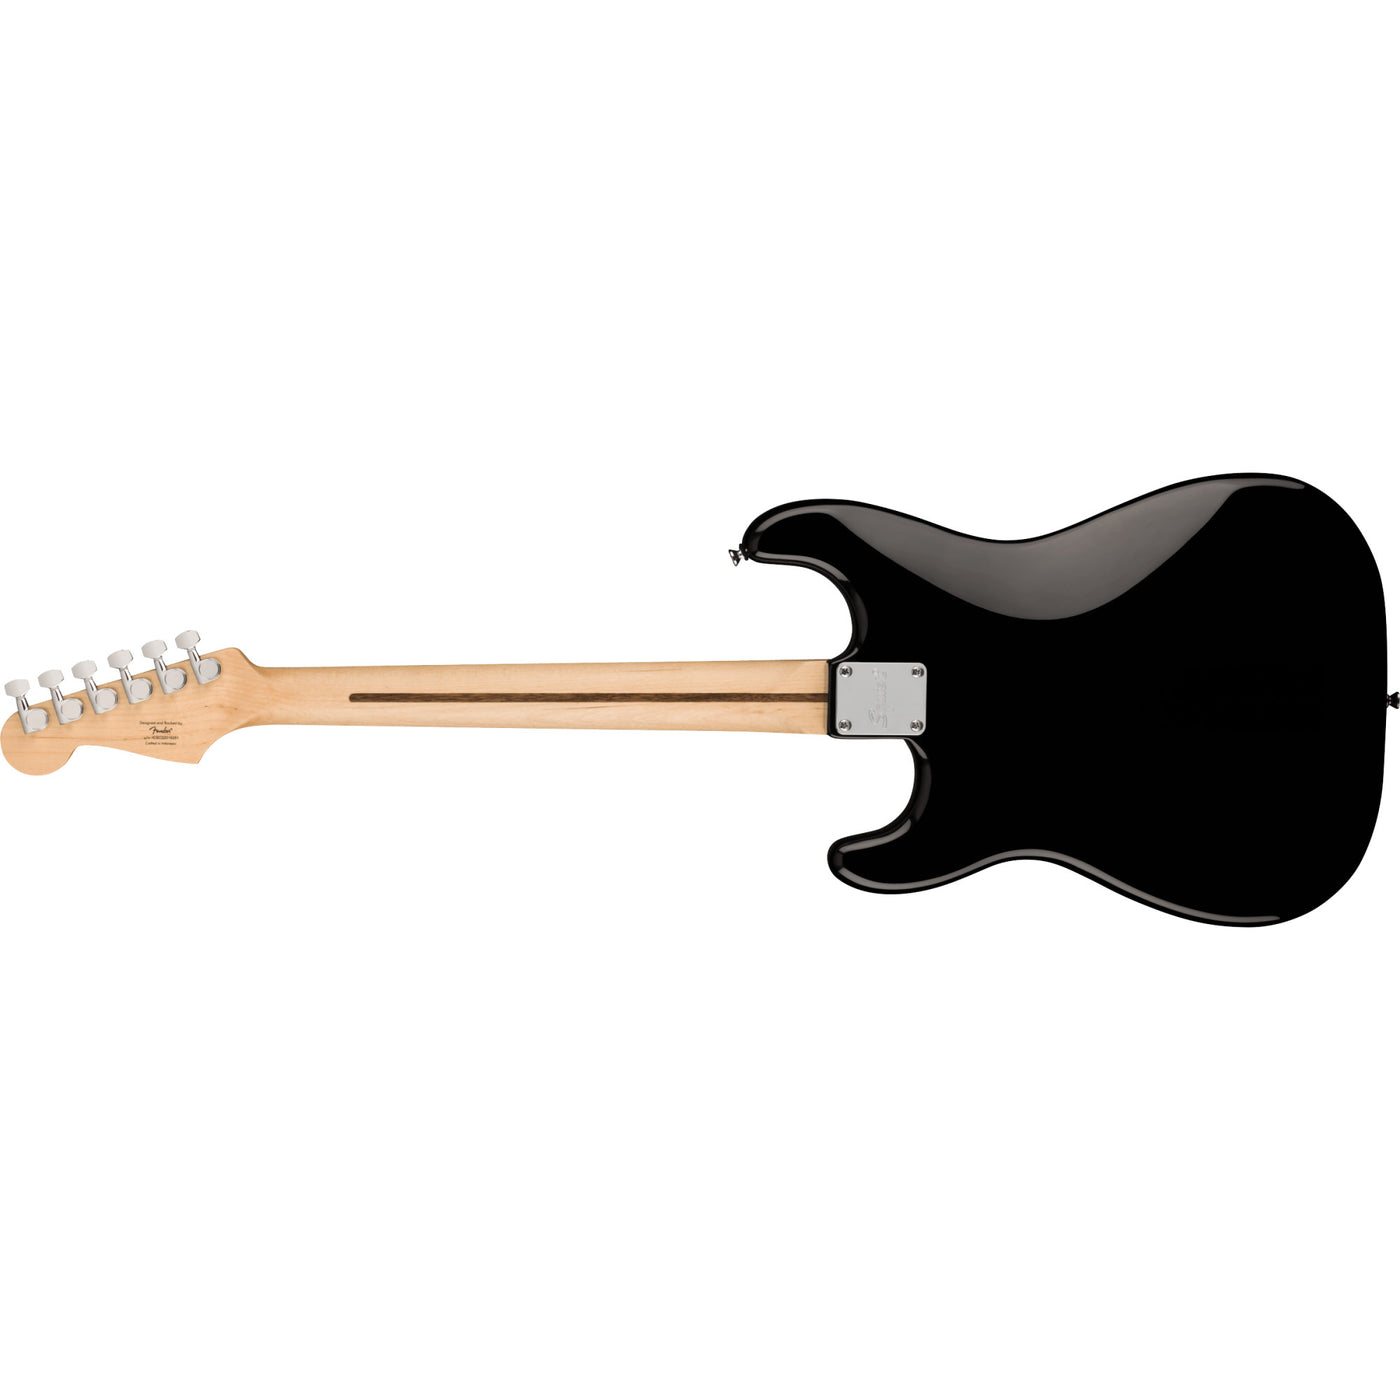 Squier Sonic Stratocaster HT H Electric Guitar, Black (0373301506)